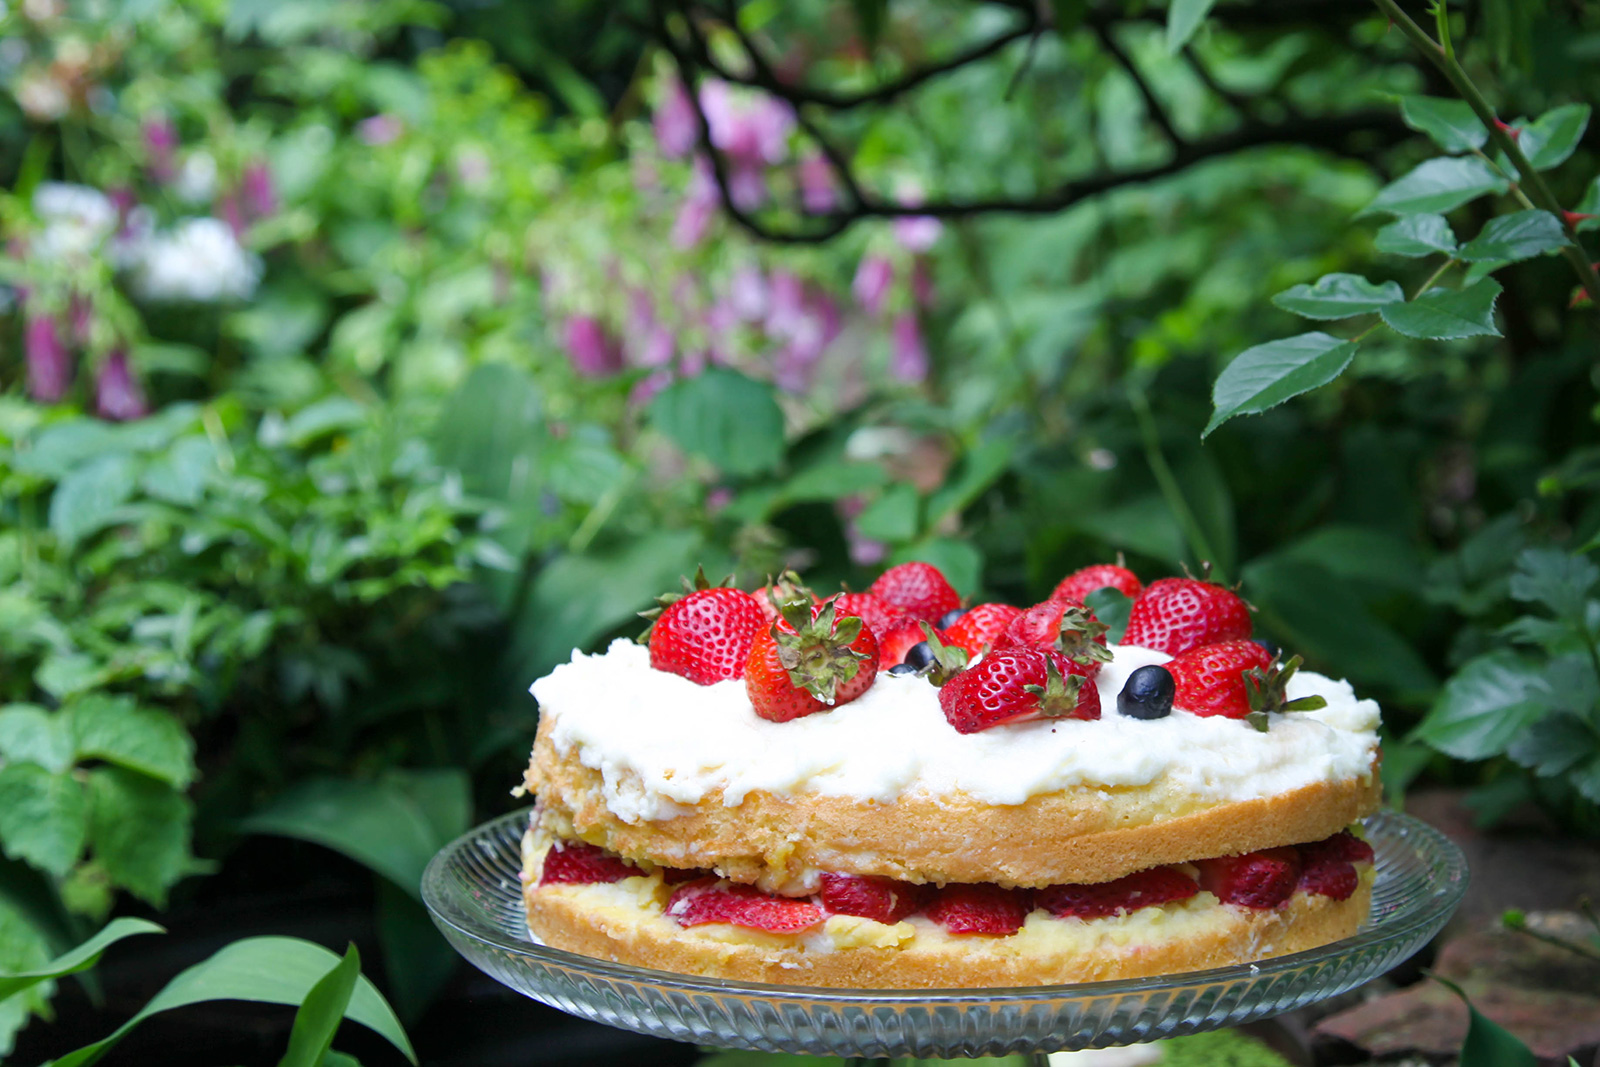 Strawberry Cake with Chantilly Cream in garden, ready to serve